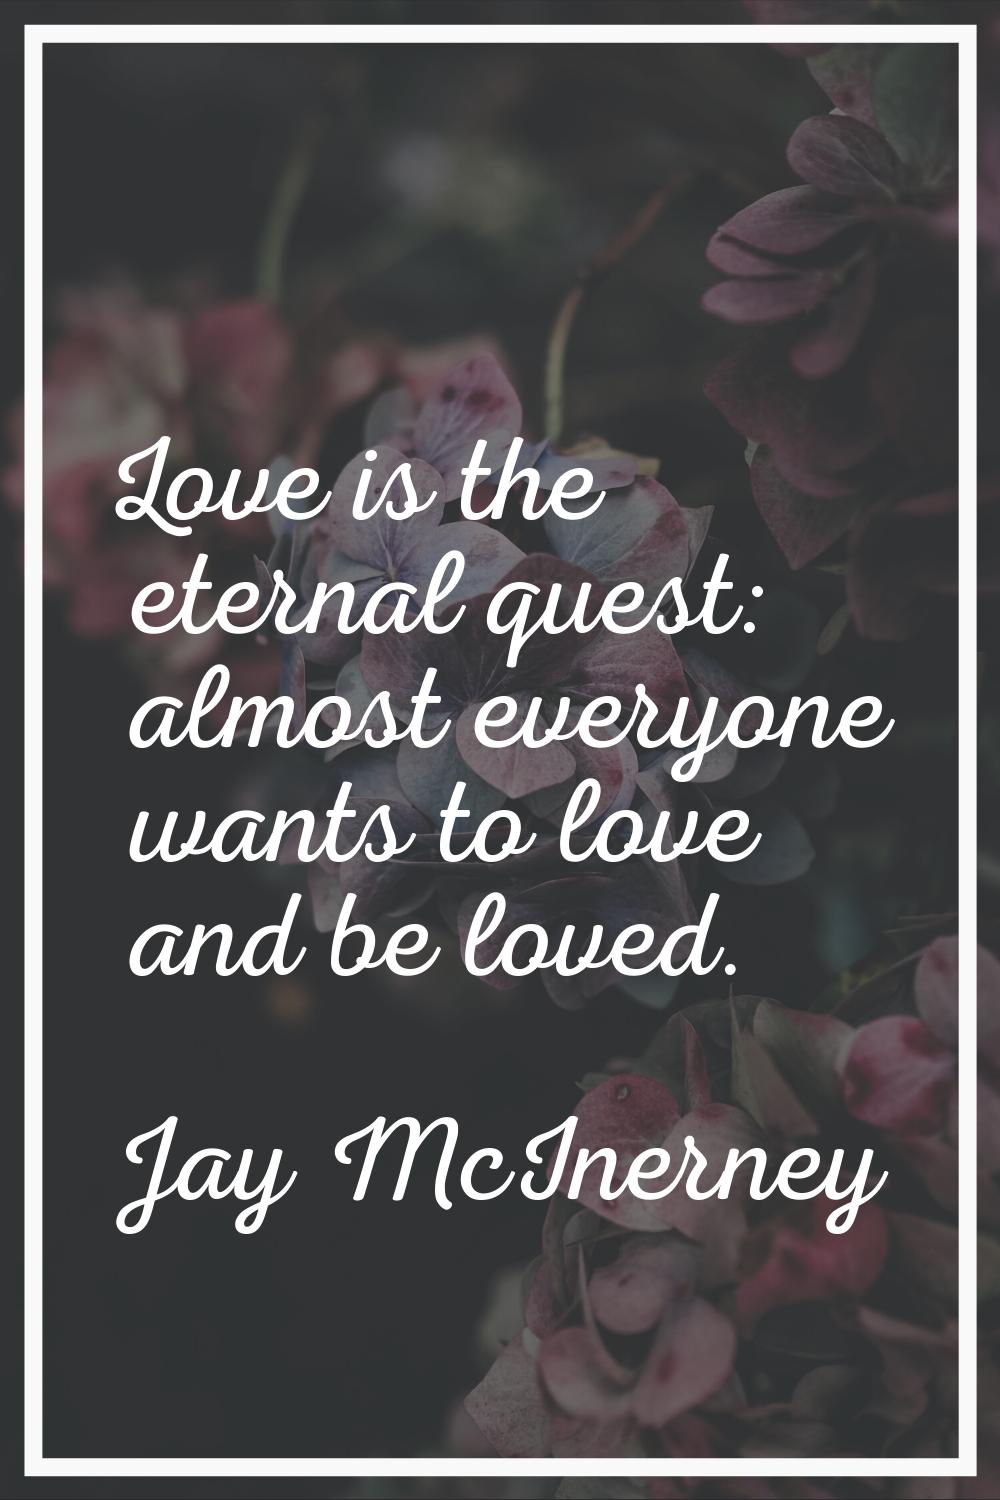 Love is the eternal quest: almost everyone wants to love and be loved.